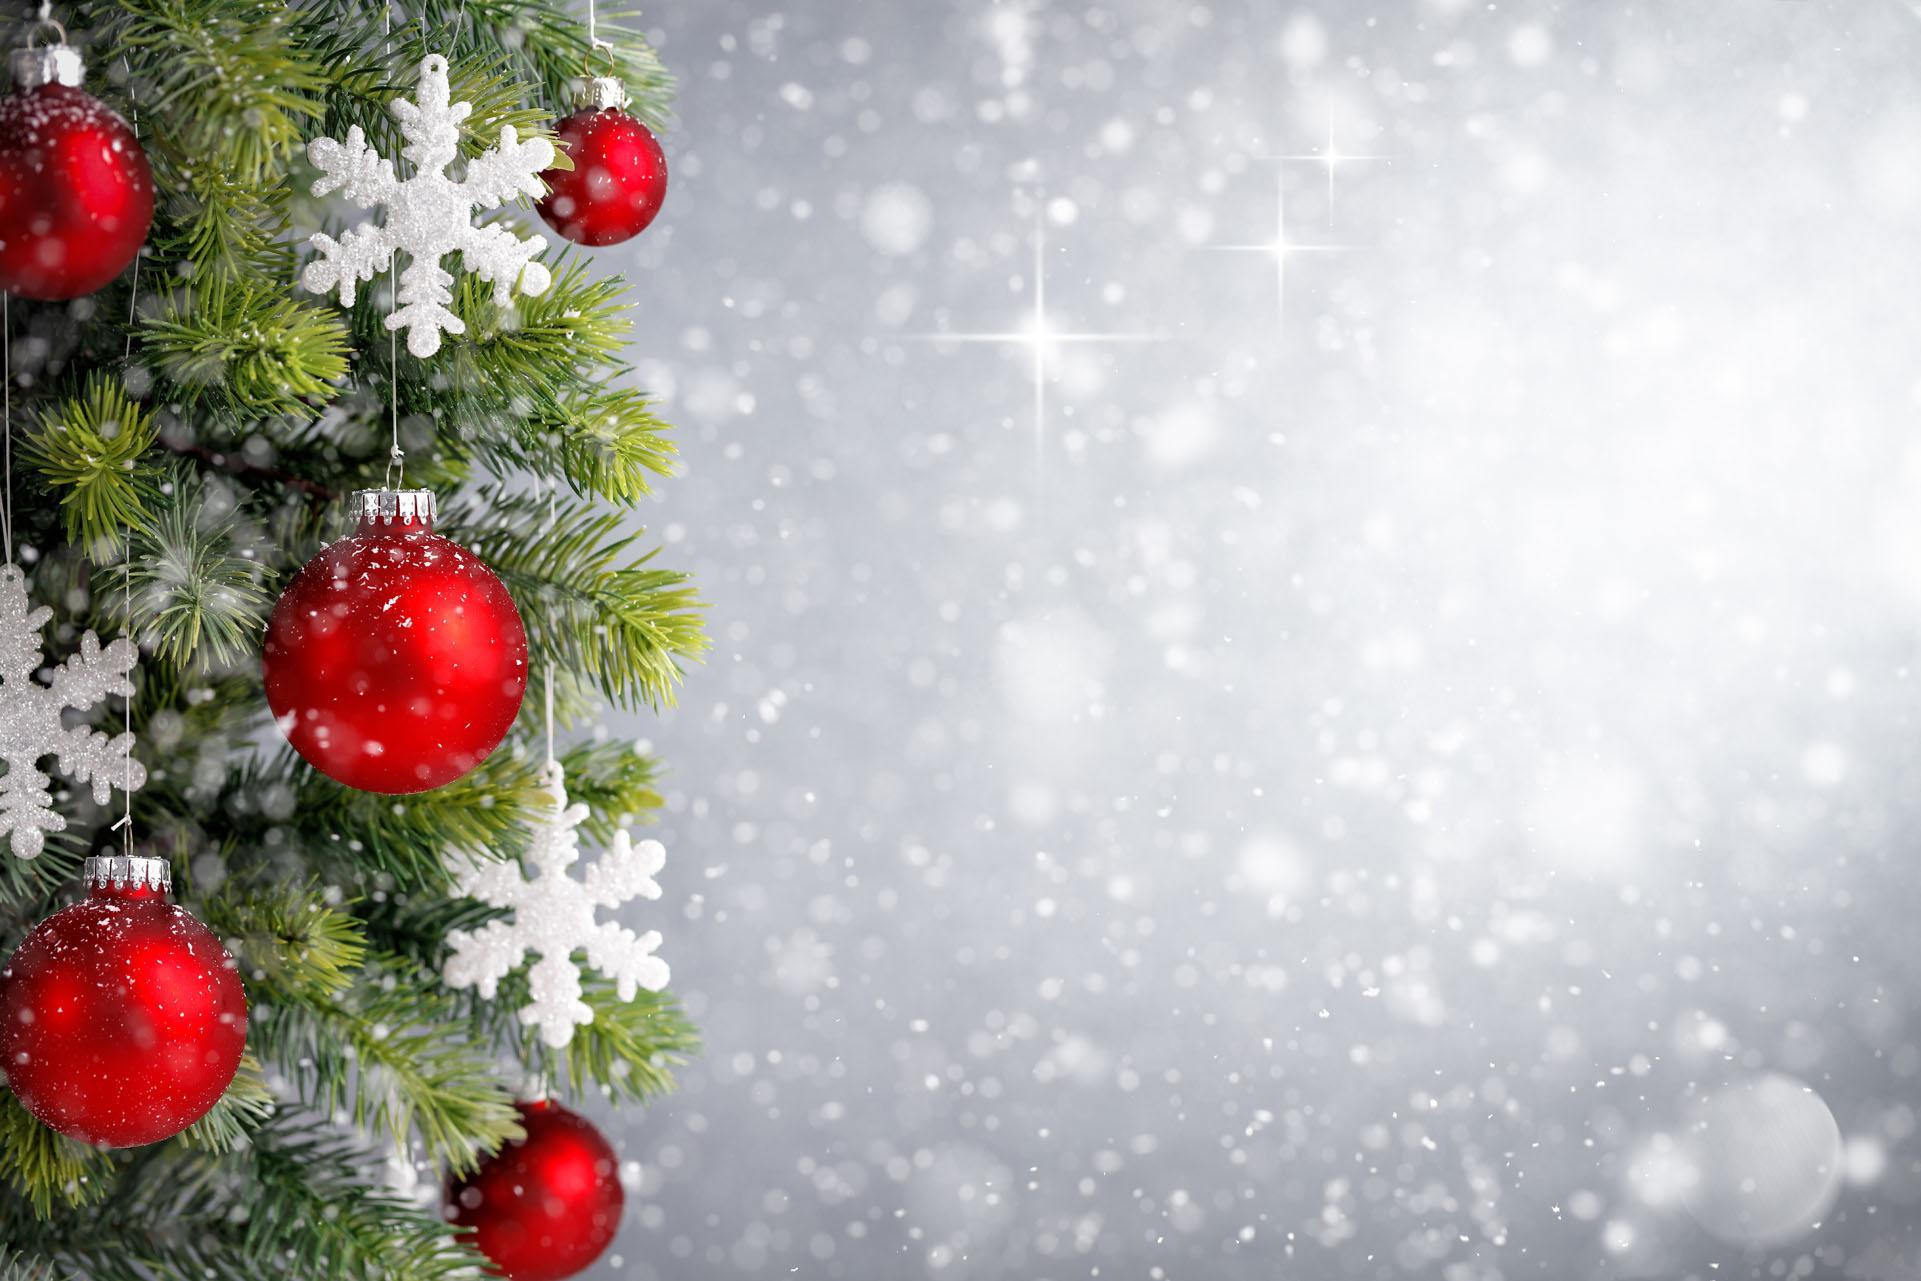 Christmas Wallpaper HD : backgrounds & themes APK untuk Unduhan Android